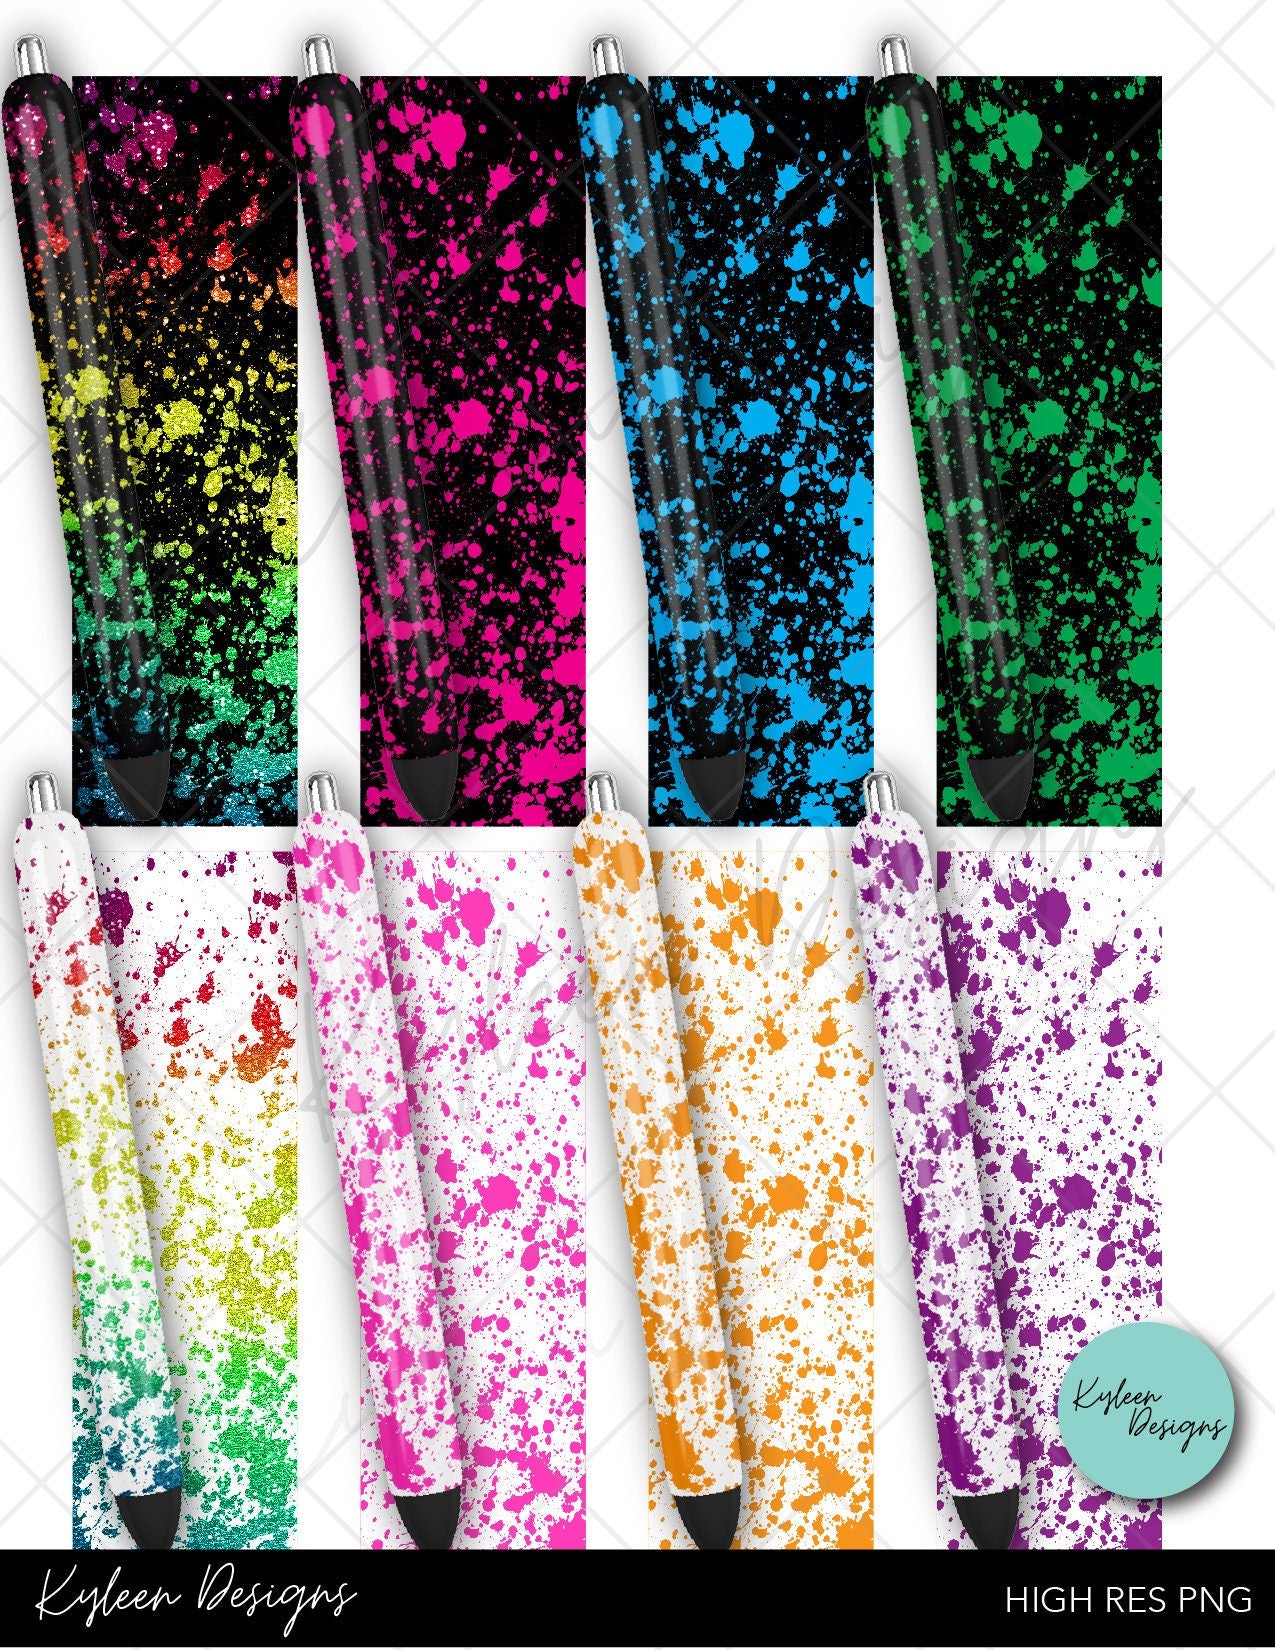 Power wash pen wraps for waterslide high RES PNG